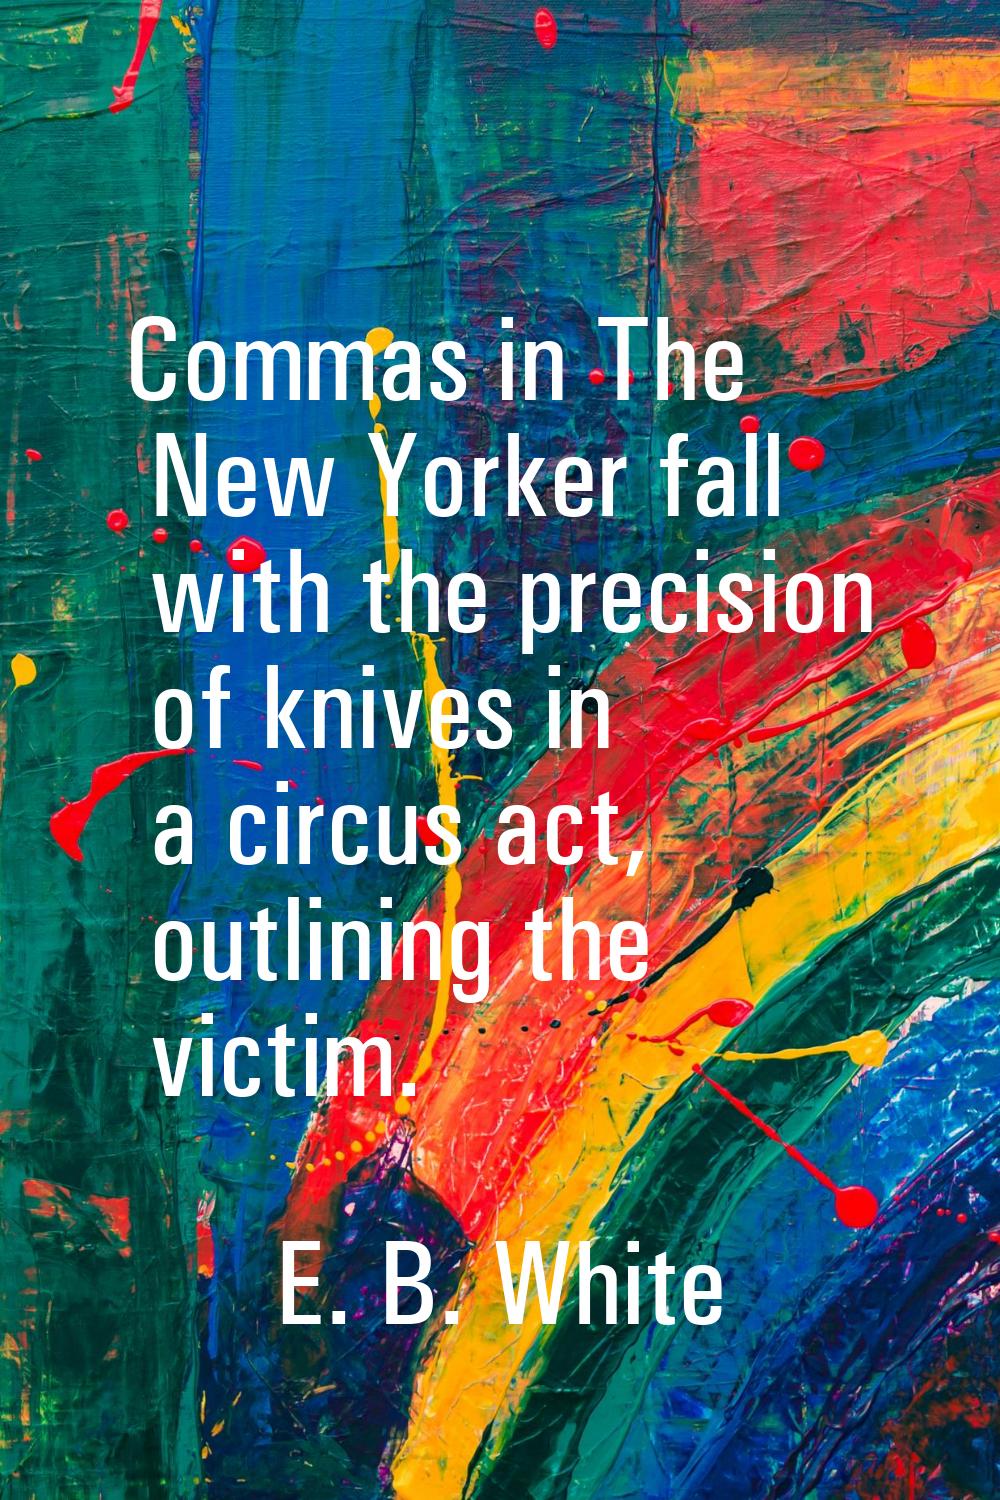 Commas in The New Yorker fall with the precision of knives in a circus act, outlining the victim.